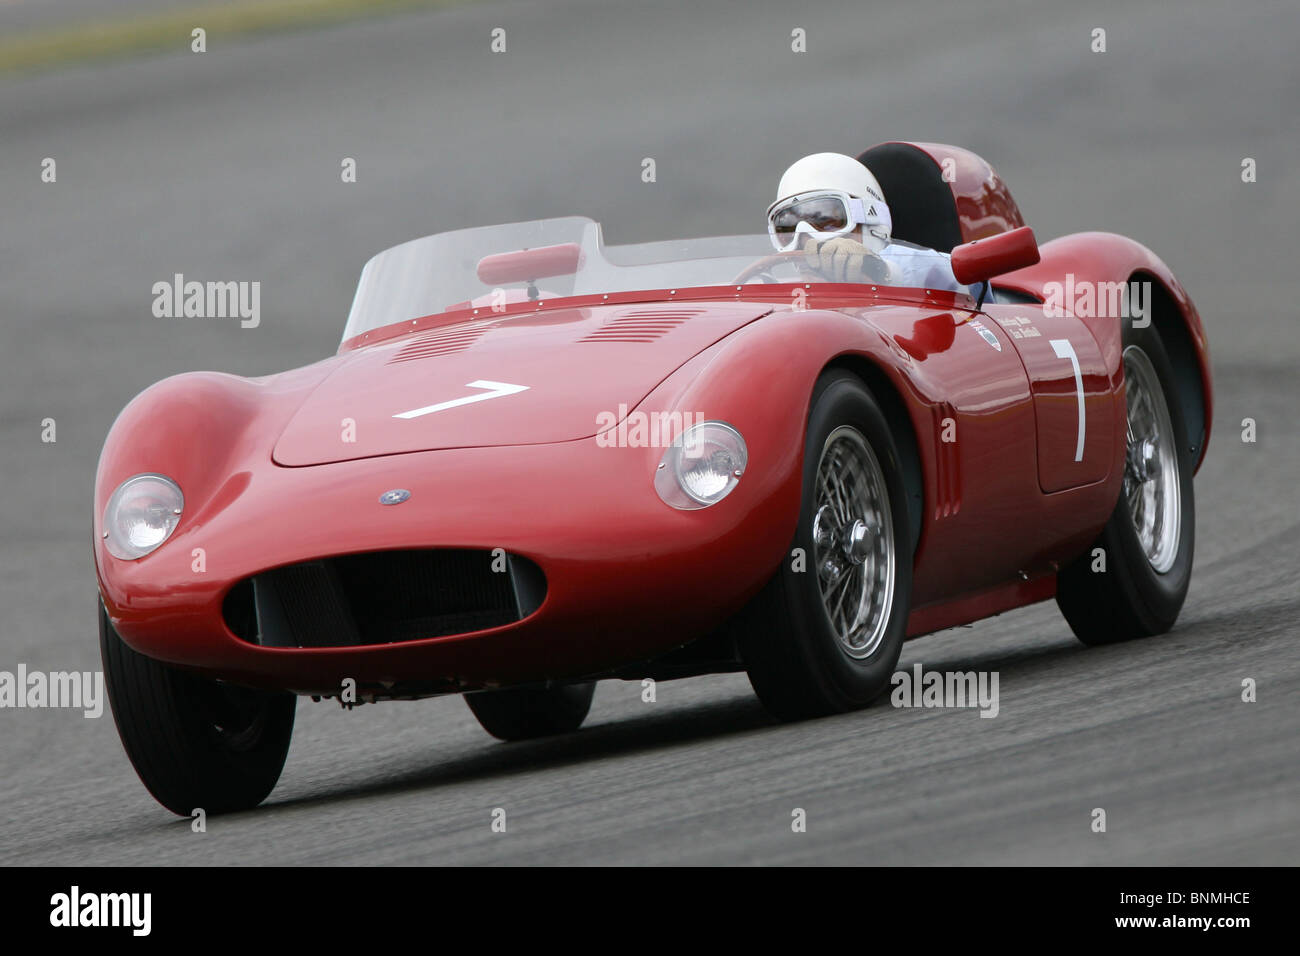 Sir Stirling Moss drives the OSCA during the Silverstone Classic, Silverstone Circuit, July 24th 2010. Stock Photo